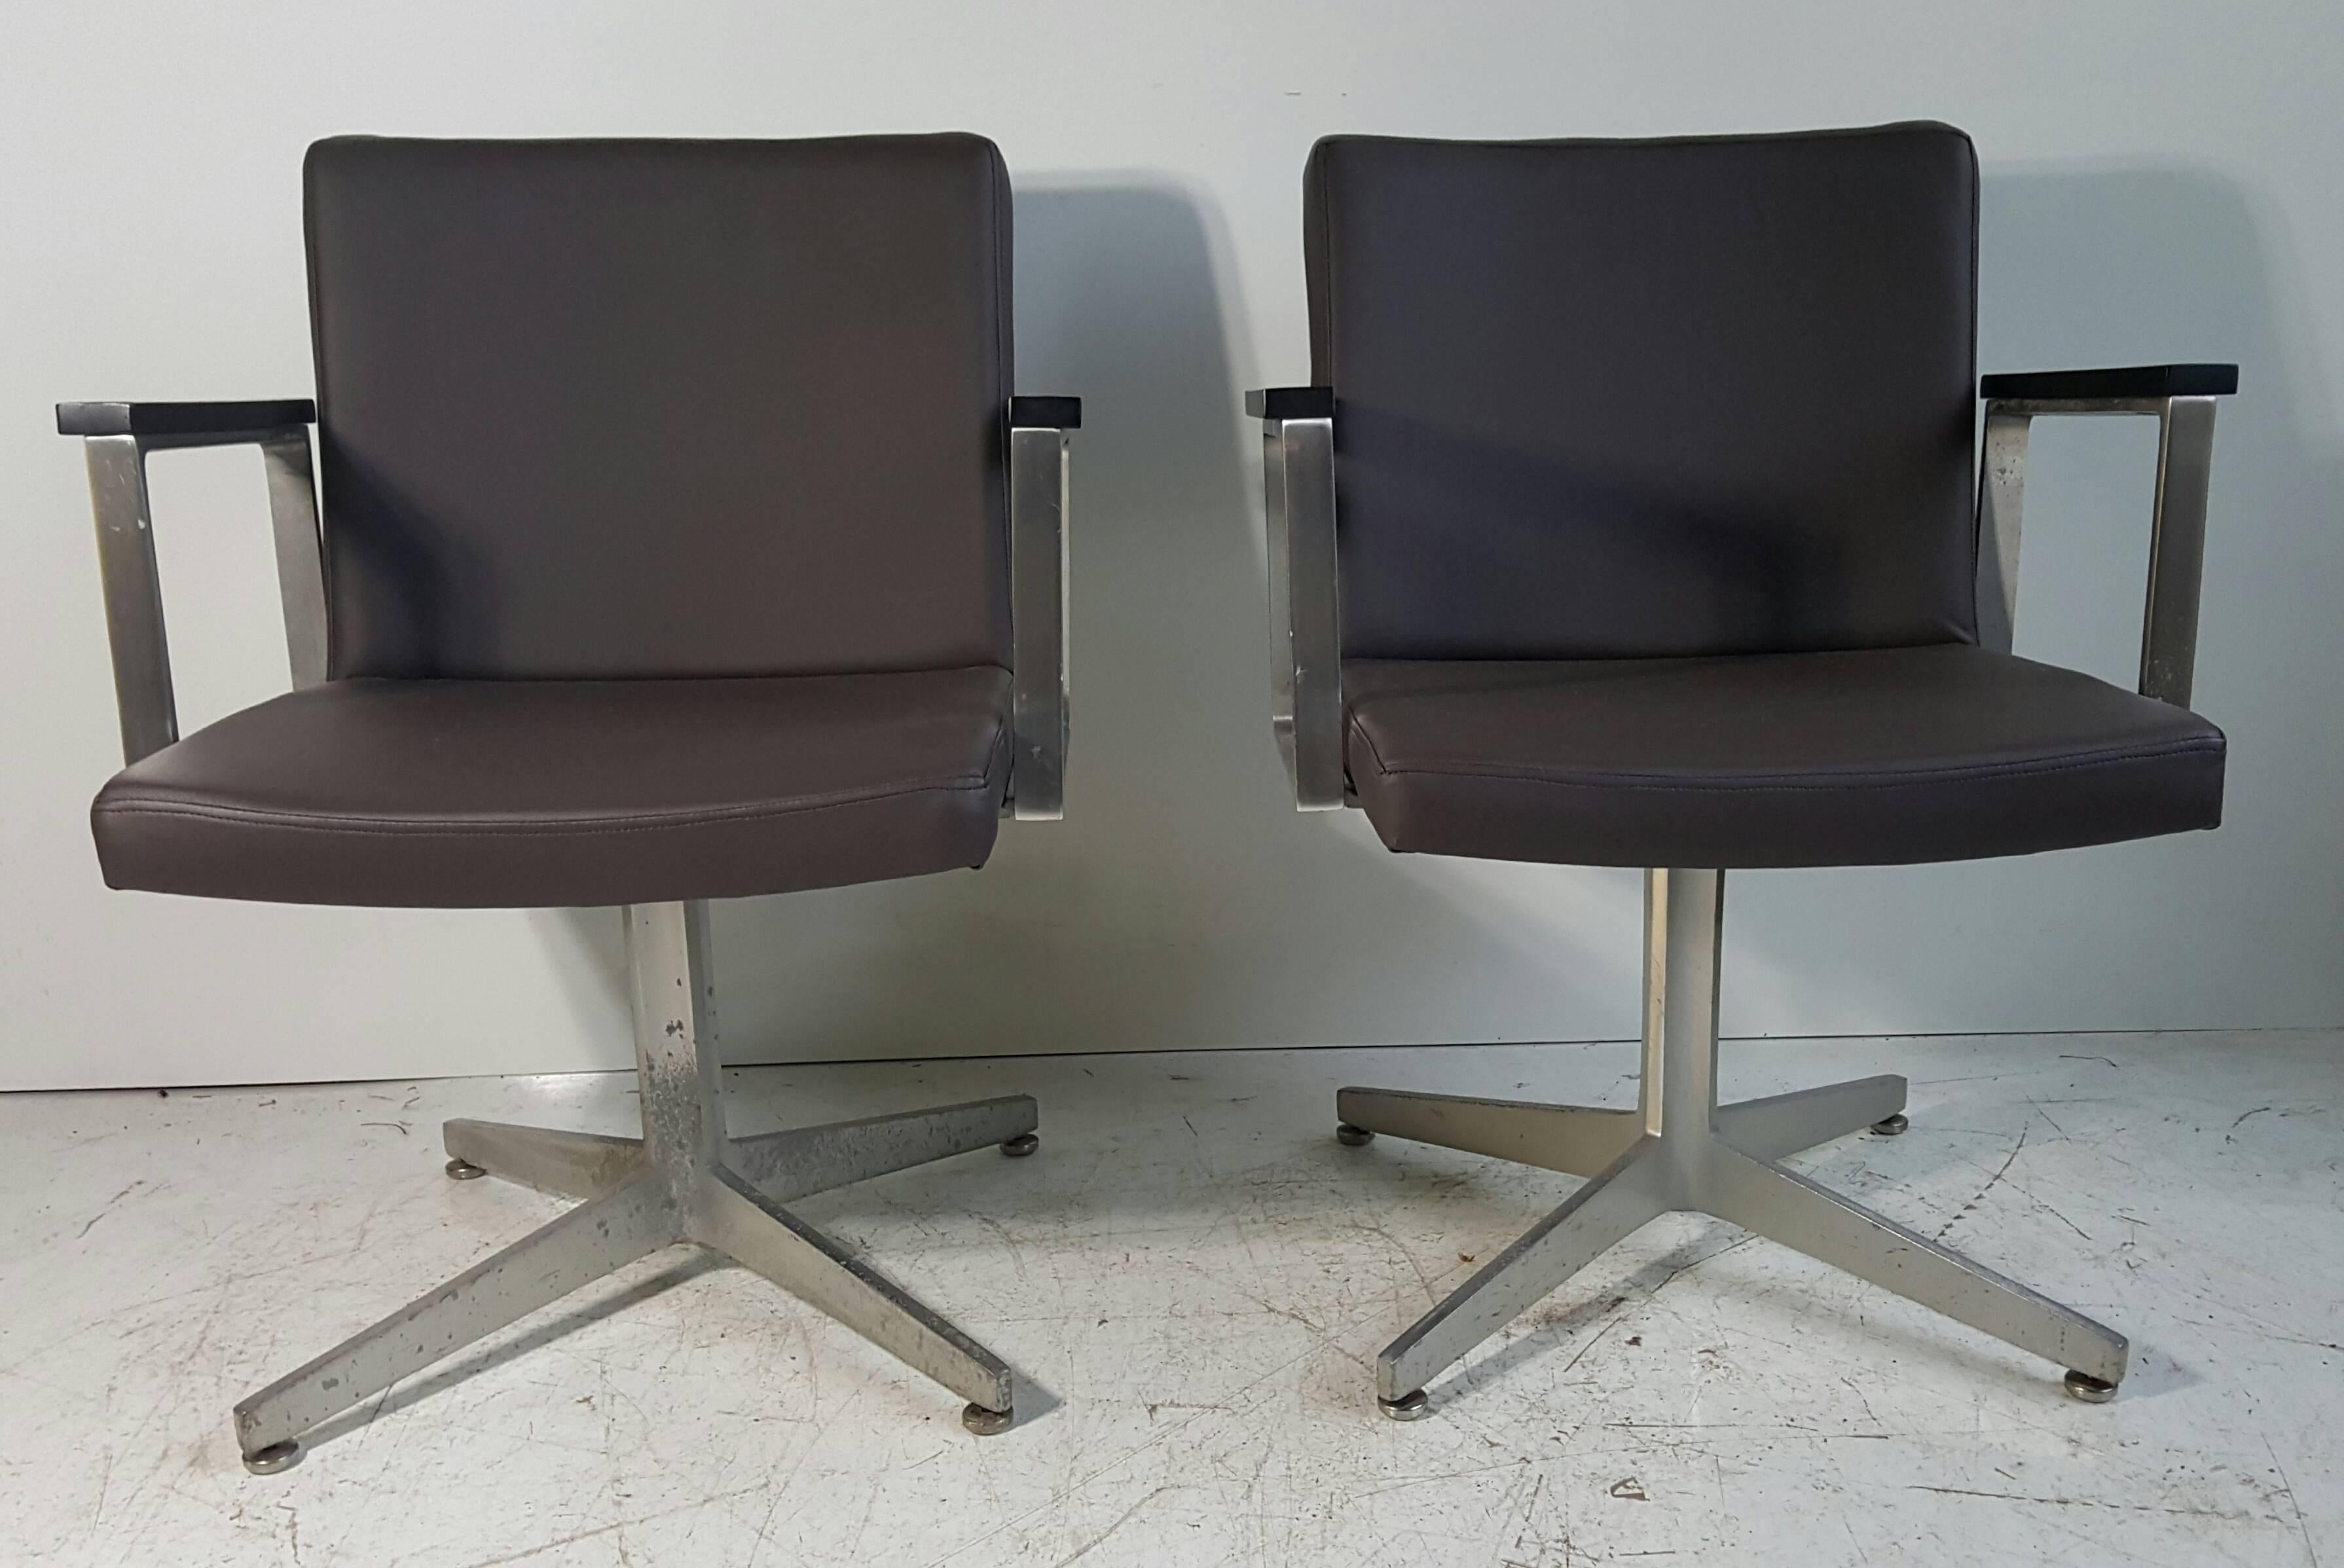 Classic pair of modernist aluminum and leather armchairs manufactured by Good Form, recently reupholstered in chocolate brown leather.